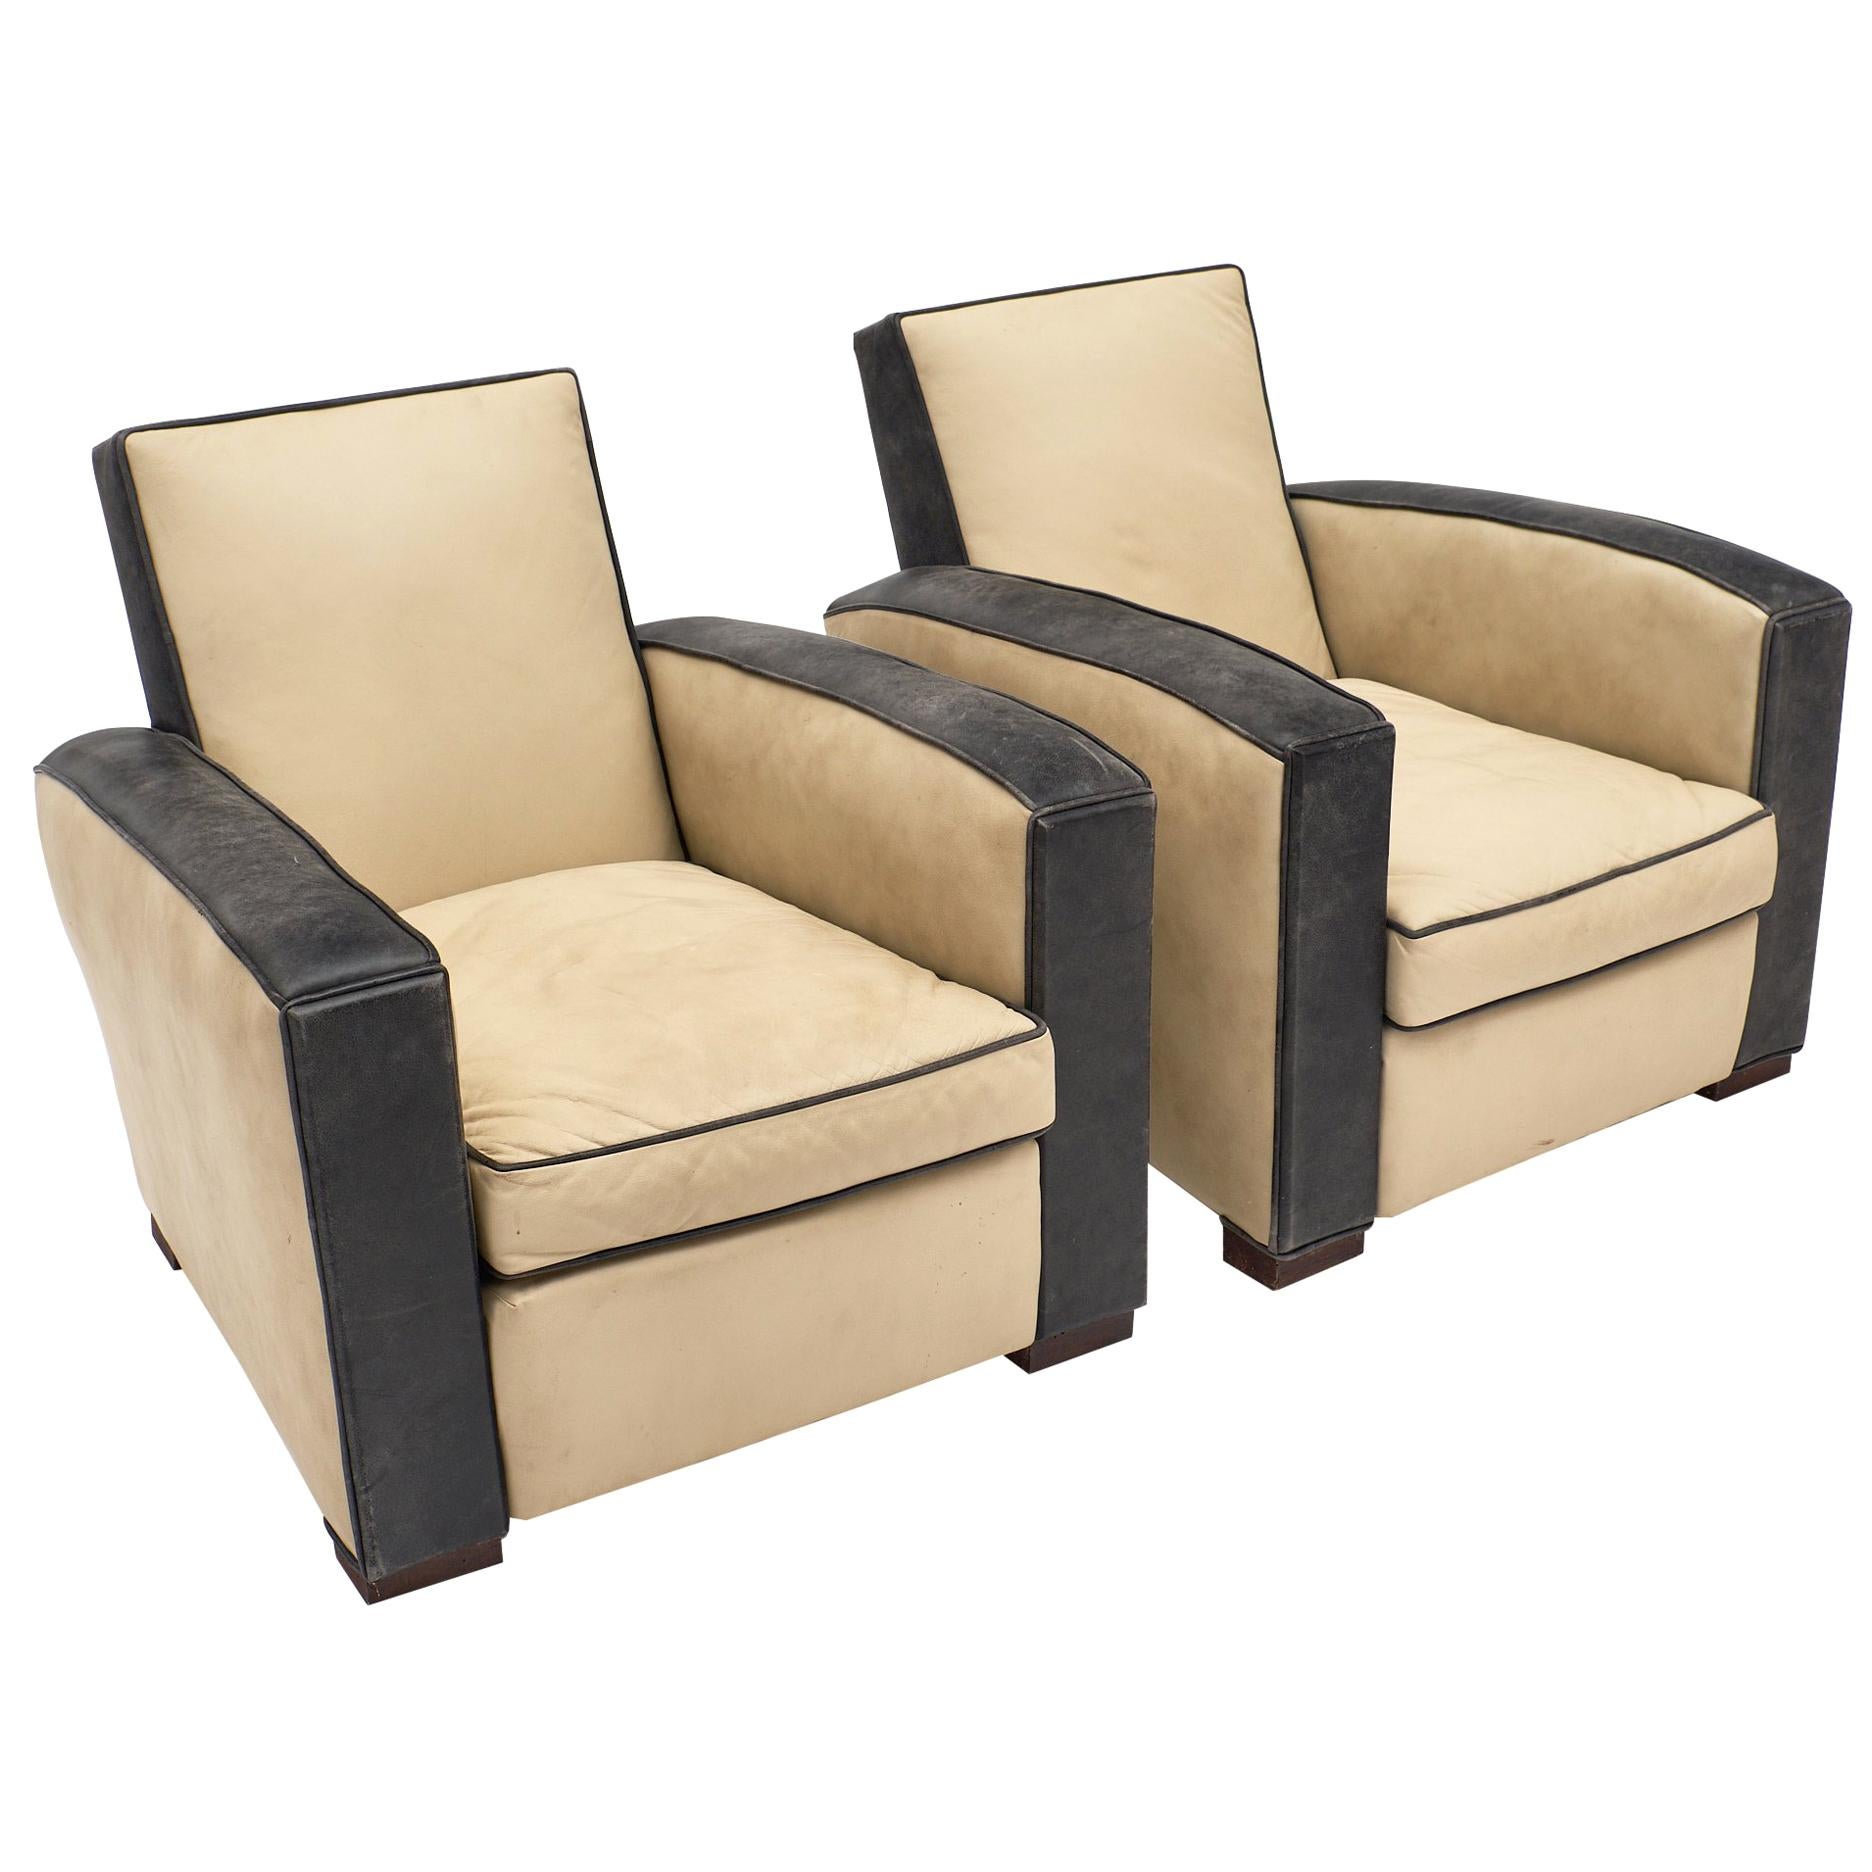 Two-Toned Leather Art Deco Club Chairs